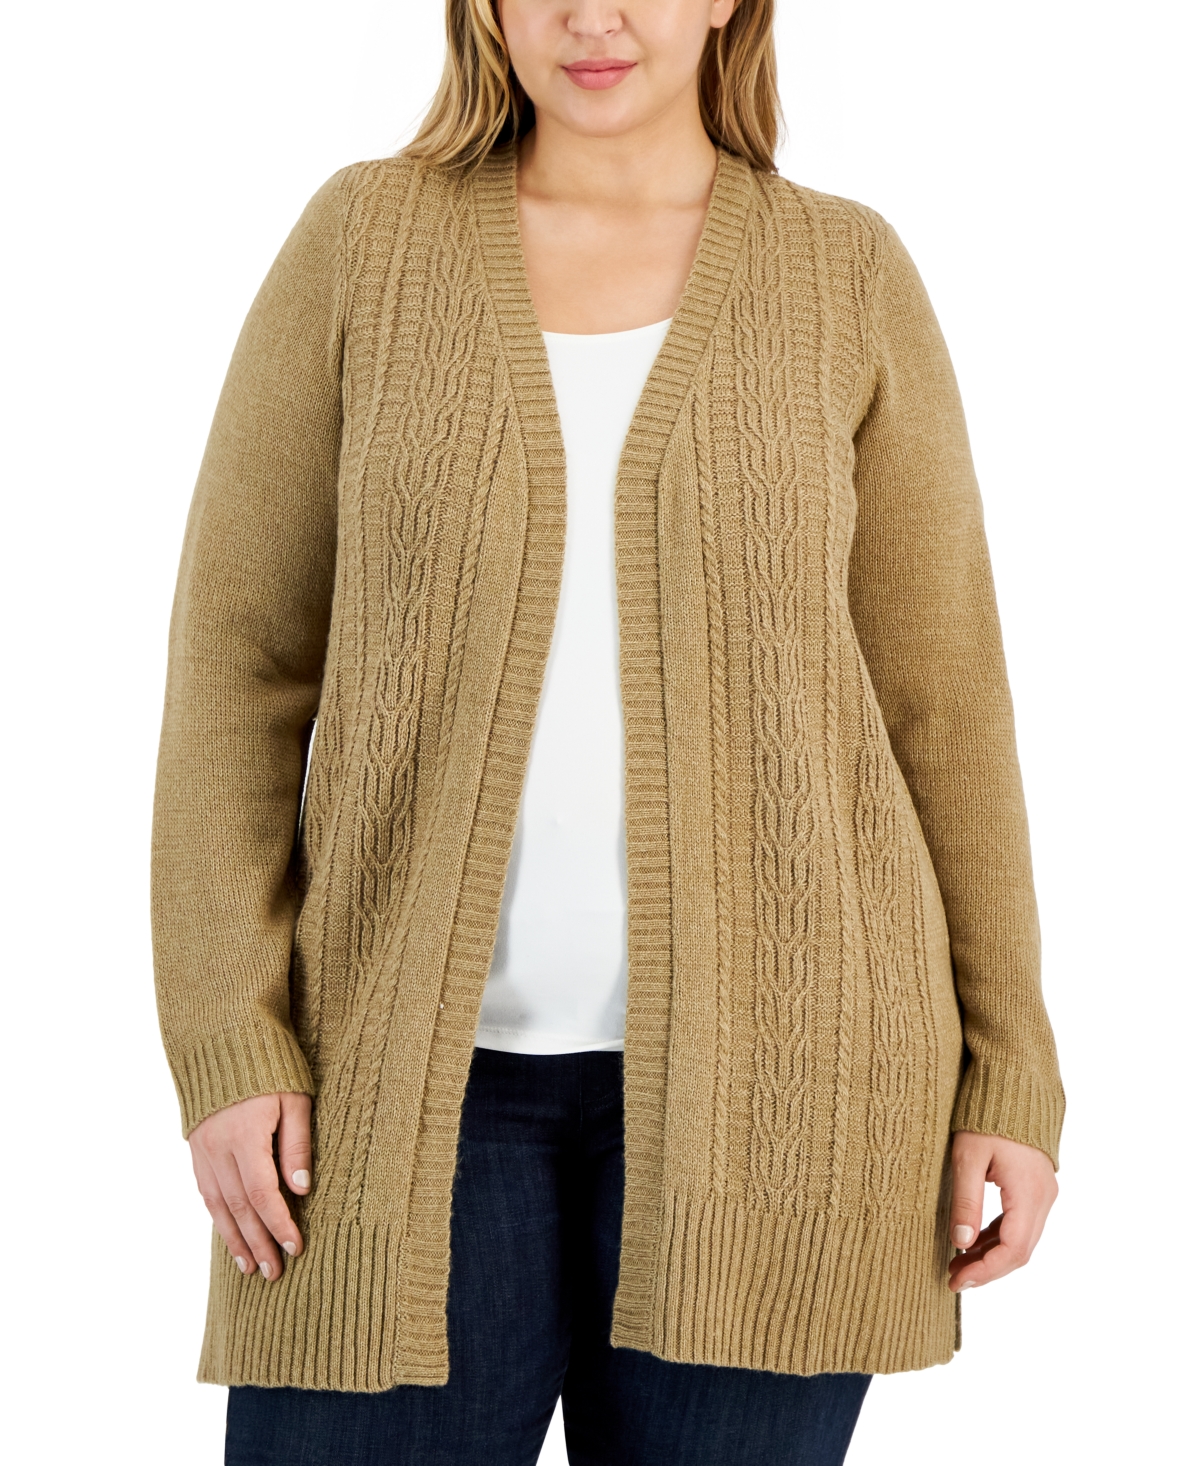 Plus Size Open-Front Duster Cardigan, Created for Macy's - Chestnut Marl